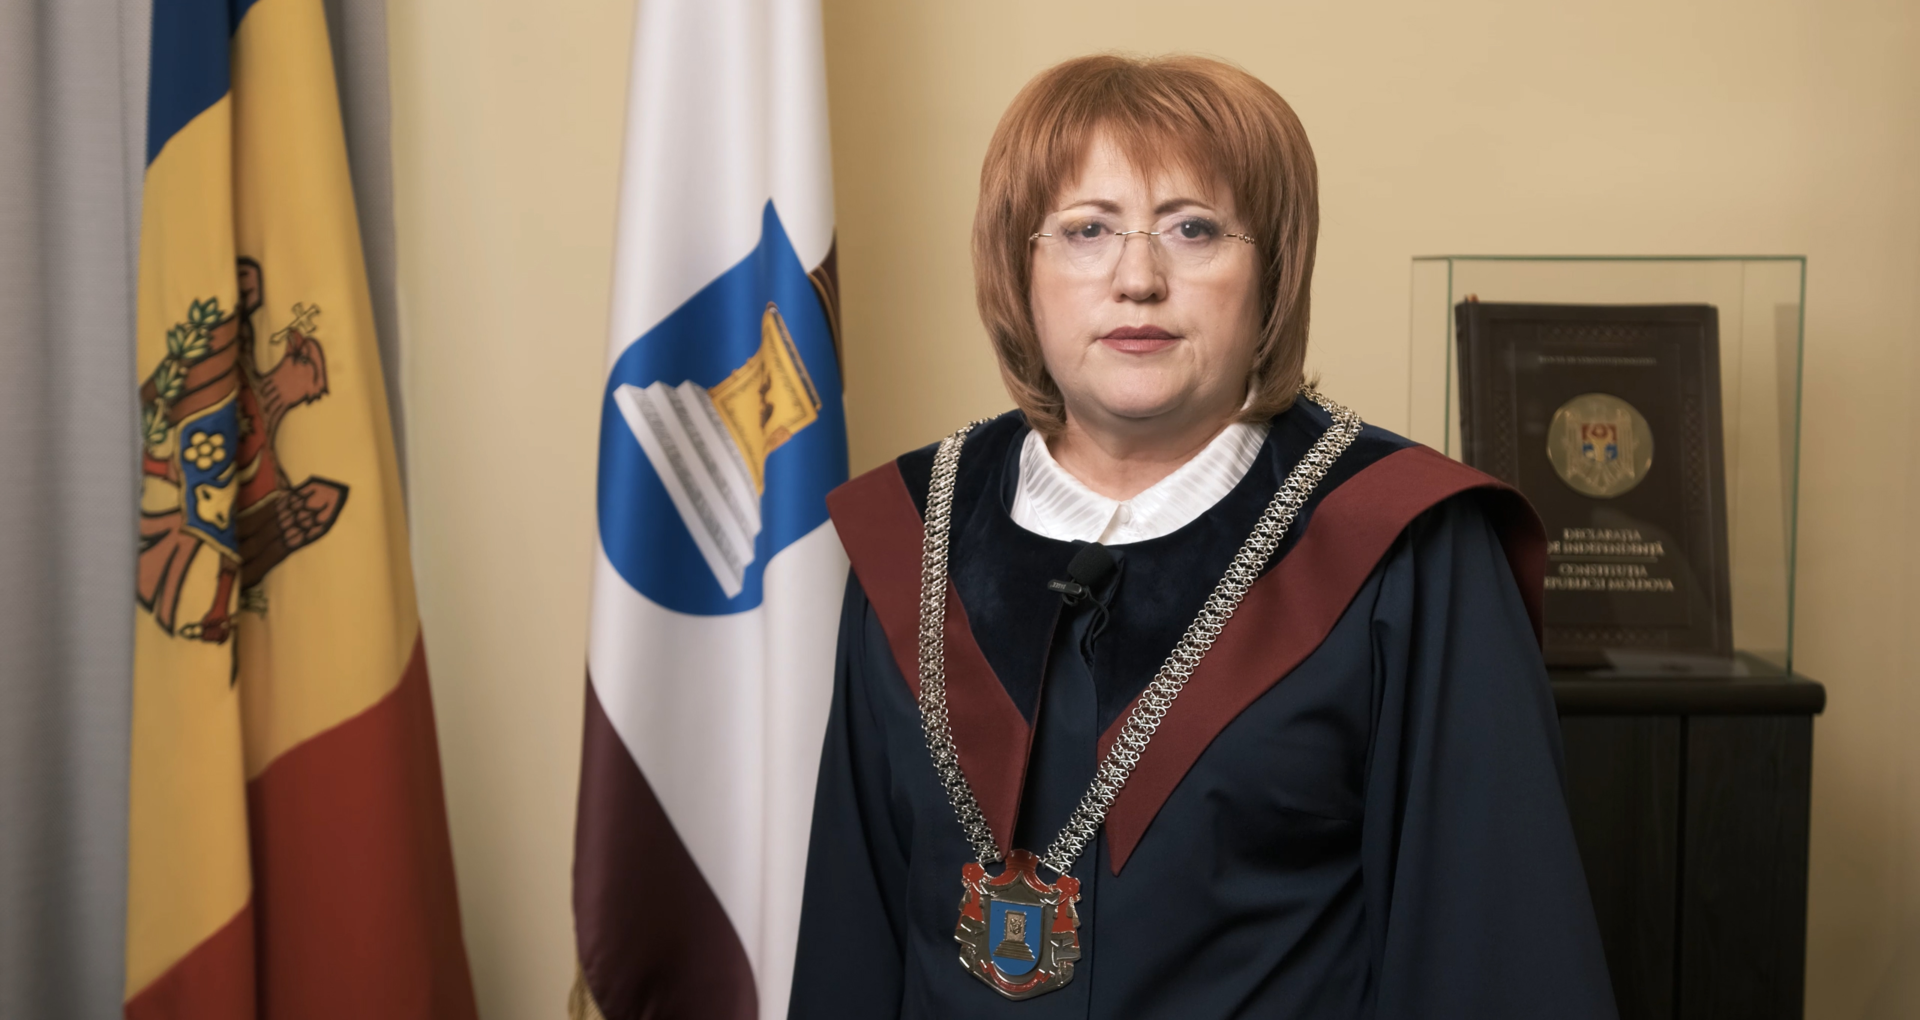 Domnica Manole returns to the head of the Constitutional Court